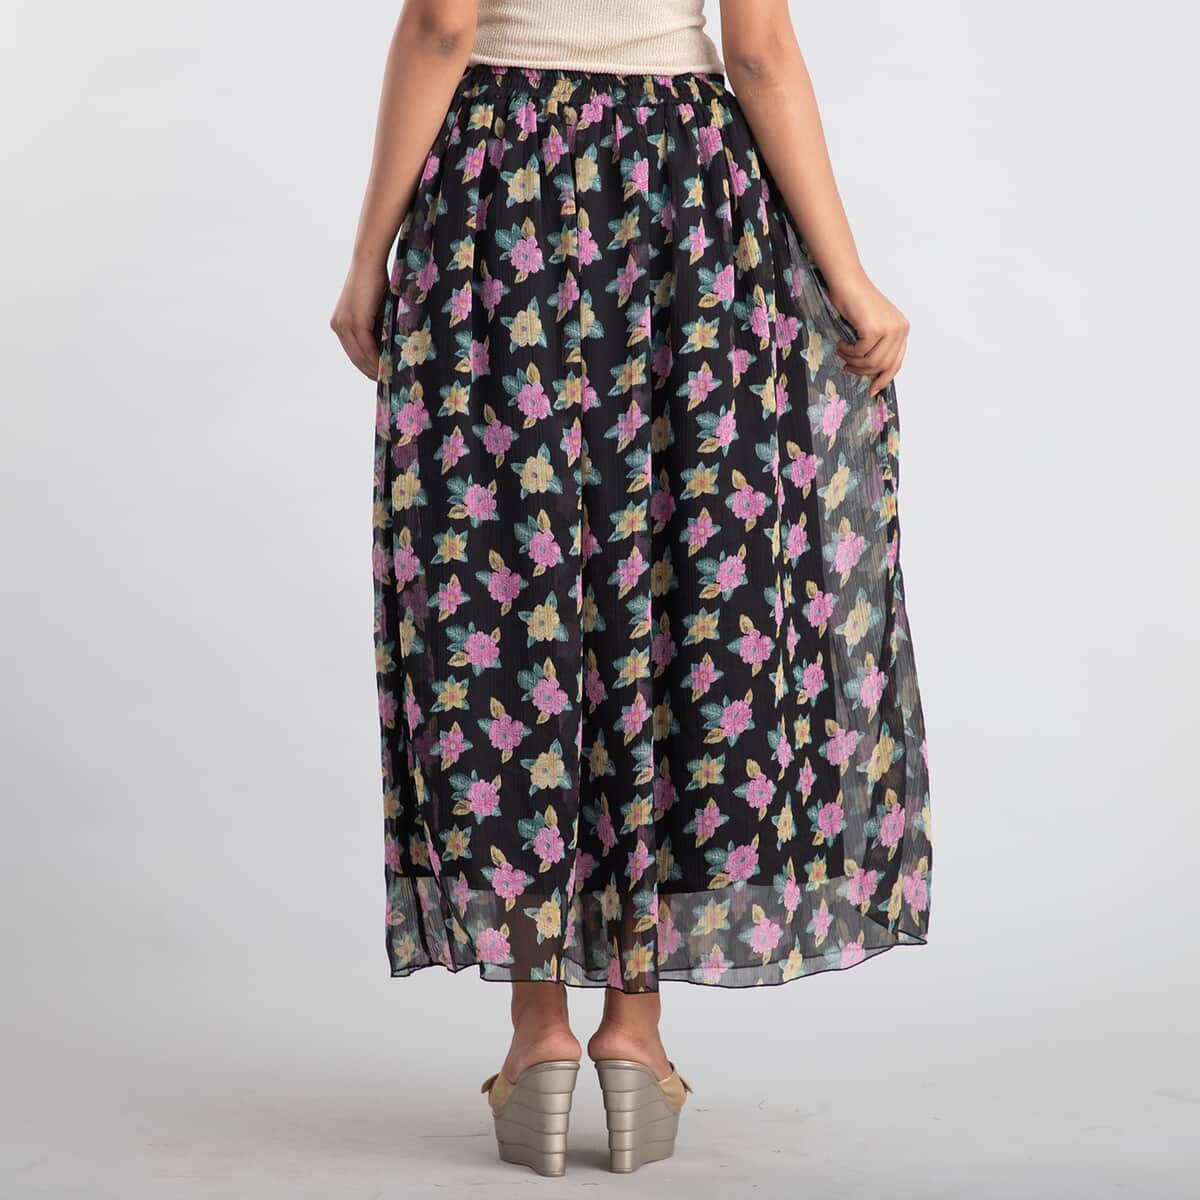 Jovie Black Floral Printed Skirt for Women with Drawstring - One Size Fits Most , Long Skirt , Summer Skirts , Women Skirt image number 1